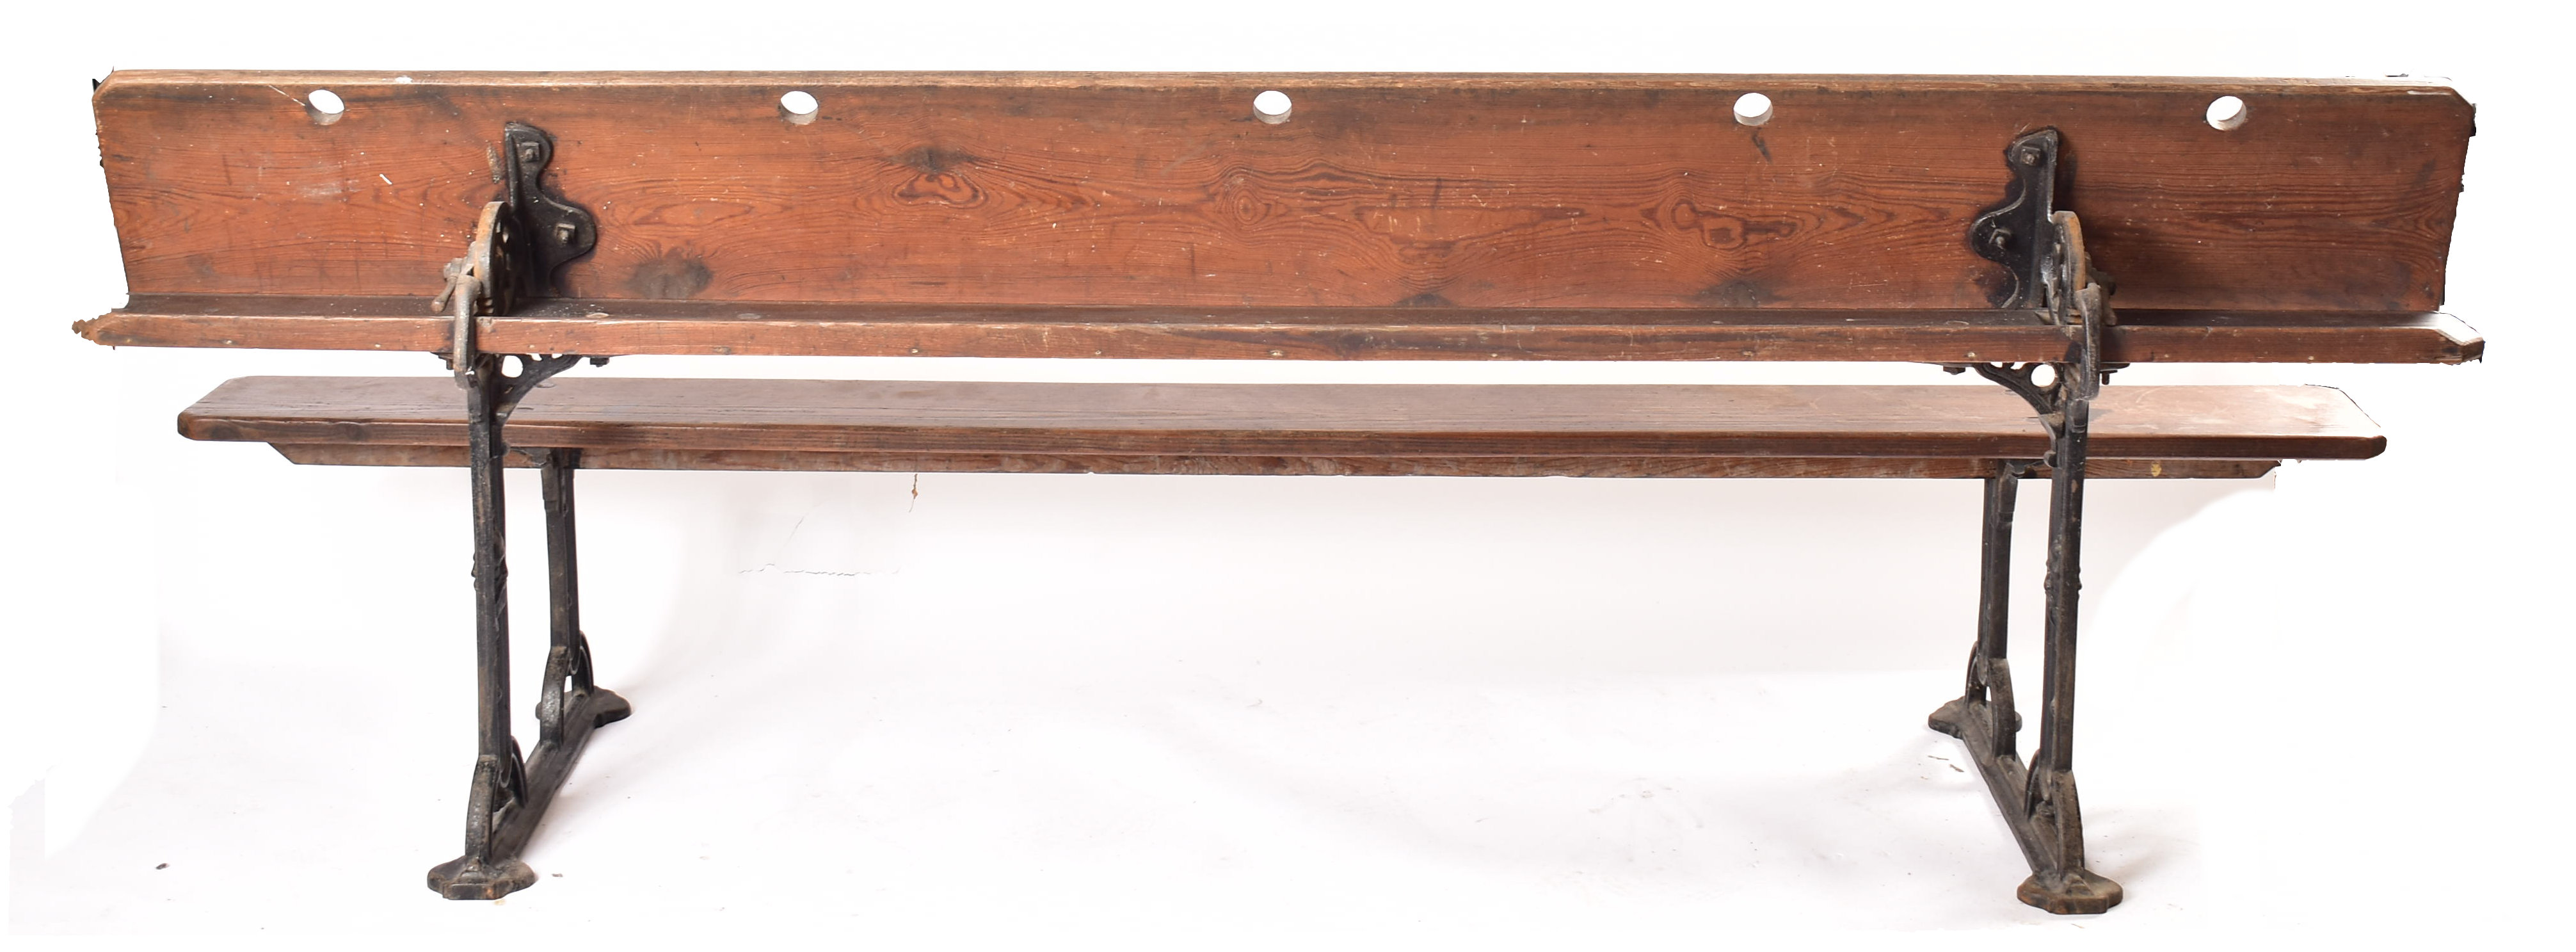 EARLY 20TH CENTURY PINE & CAST IRON SCHOOL BENCH DESK - Image 8 of 8